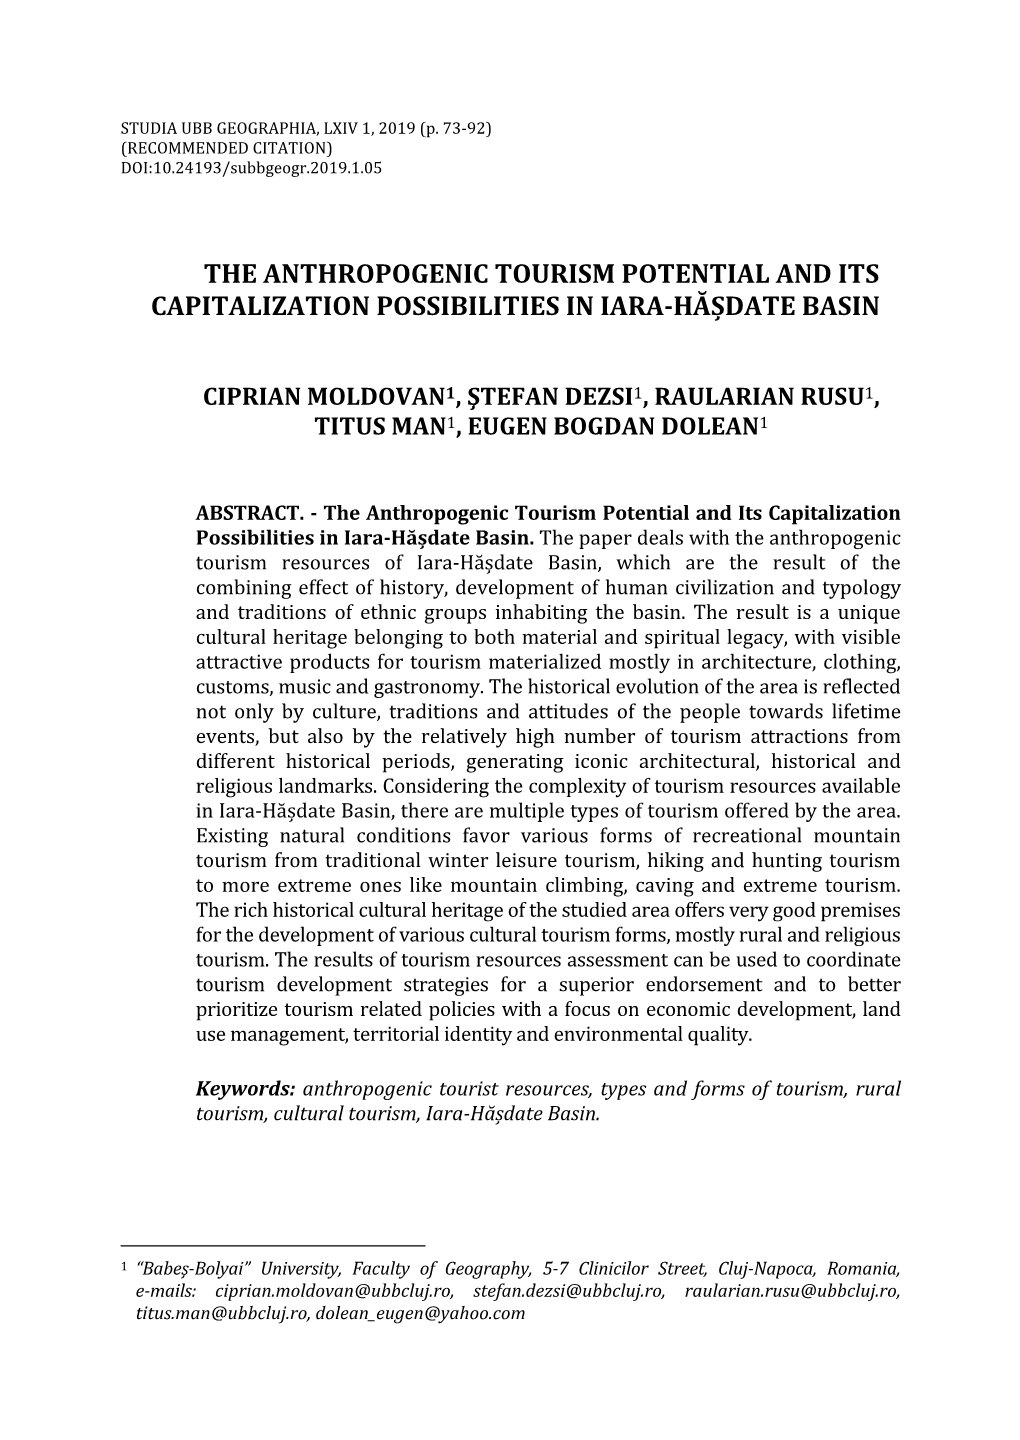 The Anthropogenic Tourism Potential and Its Capitalization Possibilities in Iara-Hășdate Basin